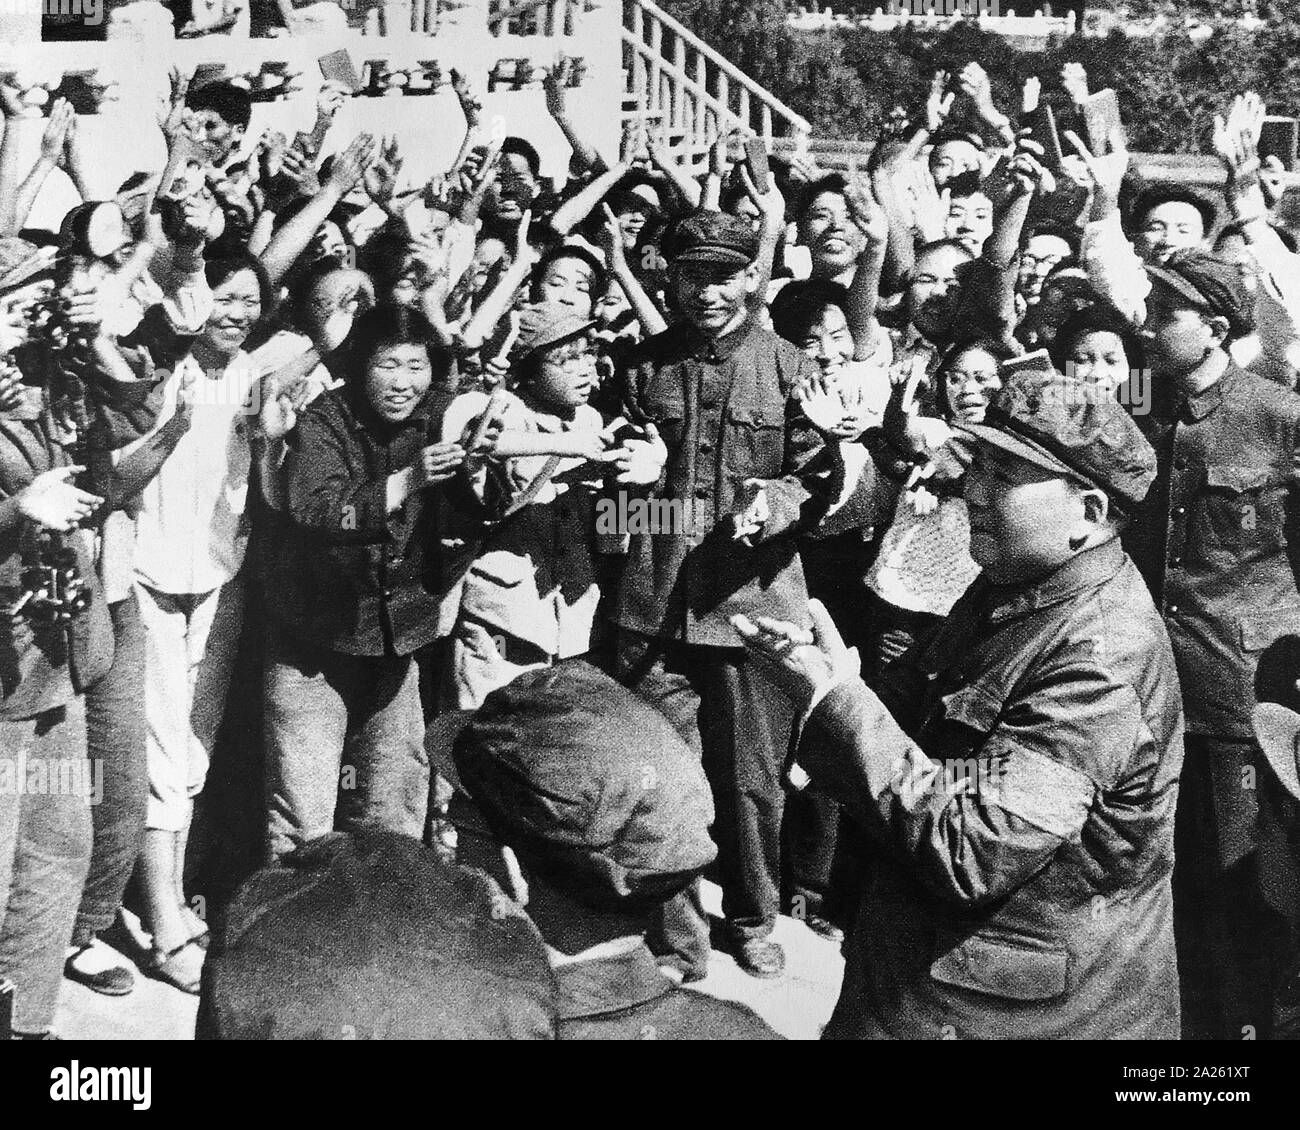 Chairman Mao with Red Guards during the Cultural Revolution. 1966. Mao Zedong (1893 - September 9, 1976), was a Chinese communist revolutionary who became the founding father of the People's Republic of China (PRC), which he ruled as the Chairman of the Communist Party of China from its establishment in 1949 until his death Stock Photo